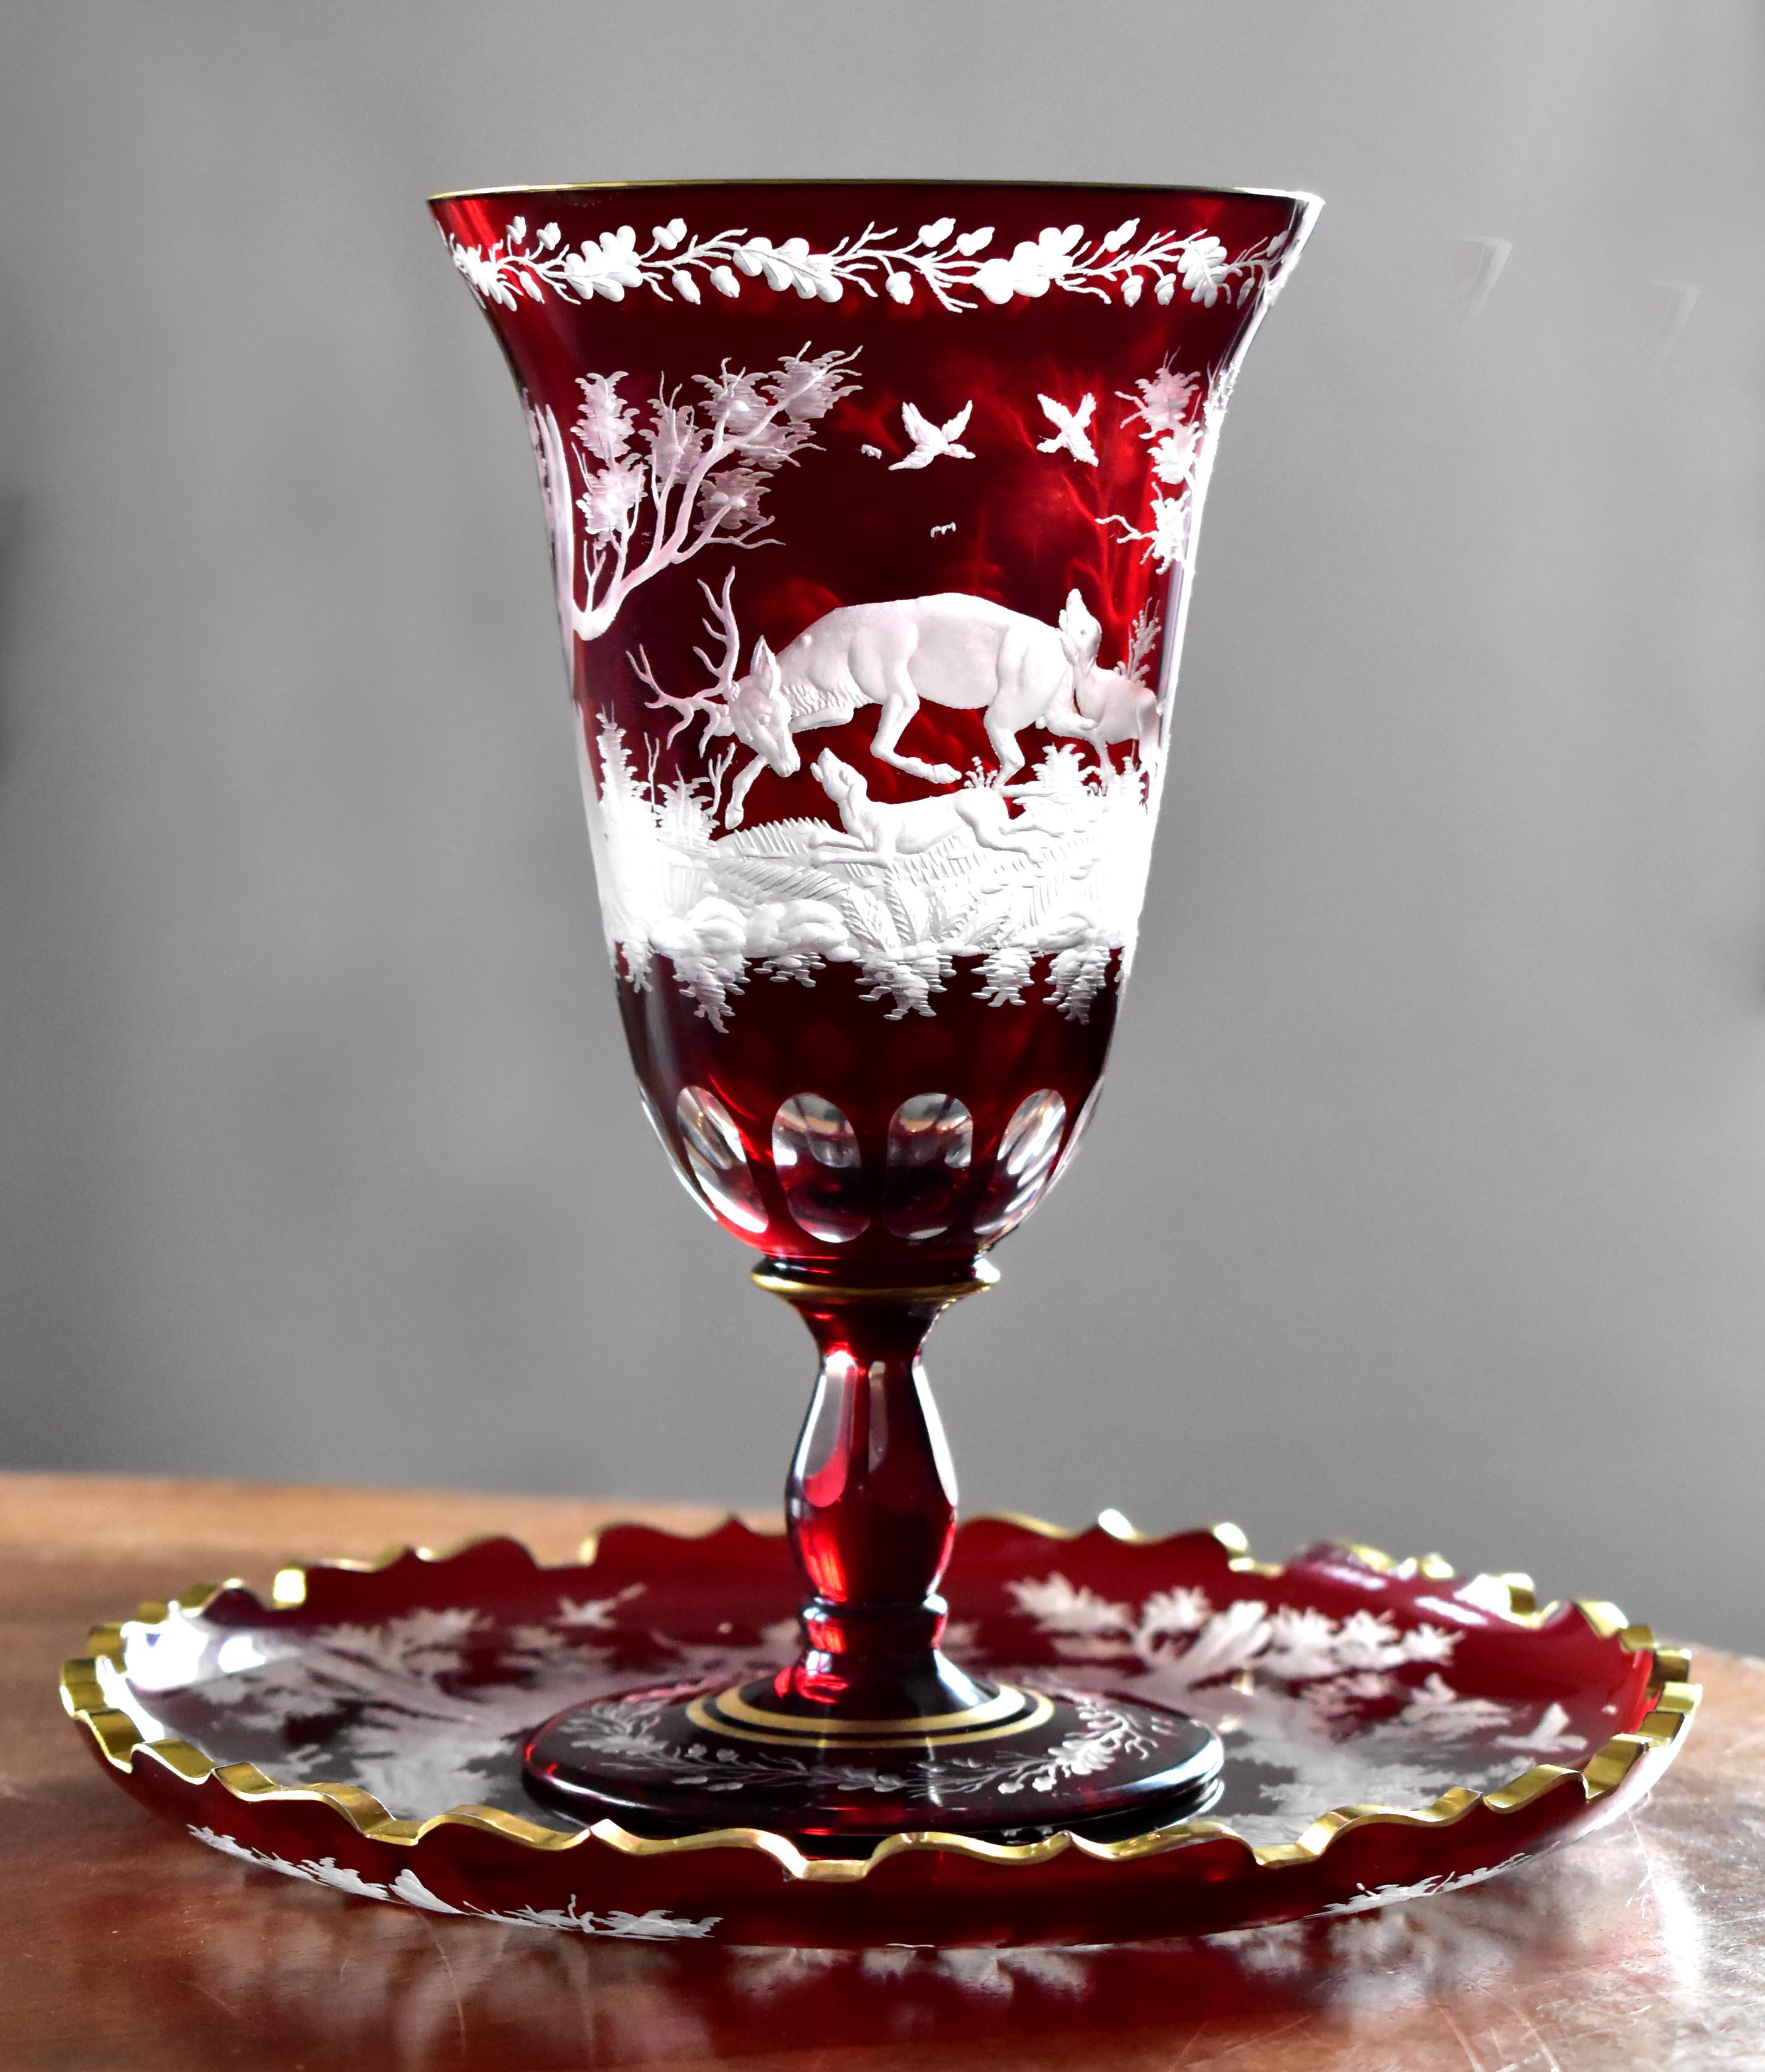 A beautiful goblet with a ruby lazure, goblet partly cut with a beautiful engraving of forest animals.In particular, the plate has an interesting cut edge that is gilded. The goblet is also complemented by gilding. Both the engraving and the shape